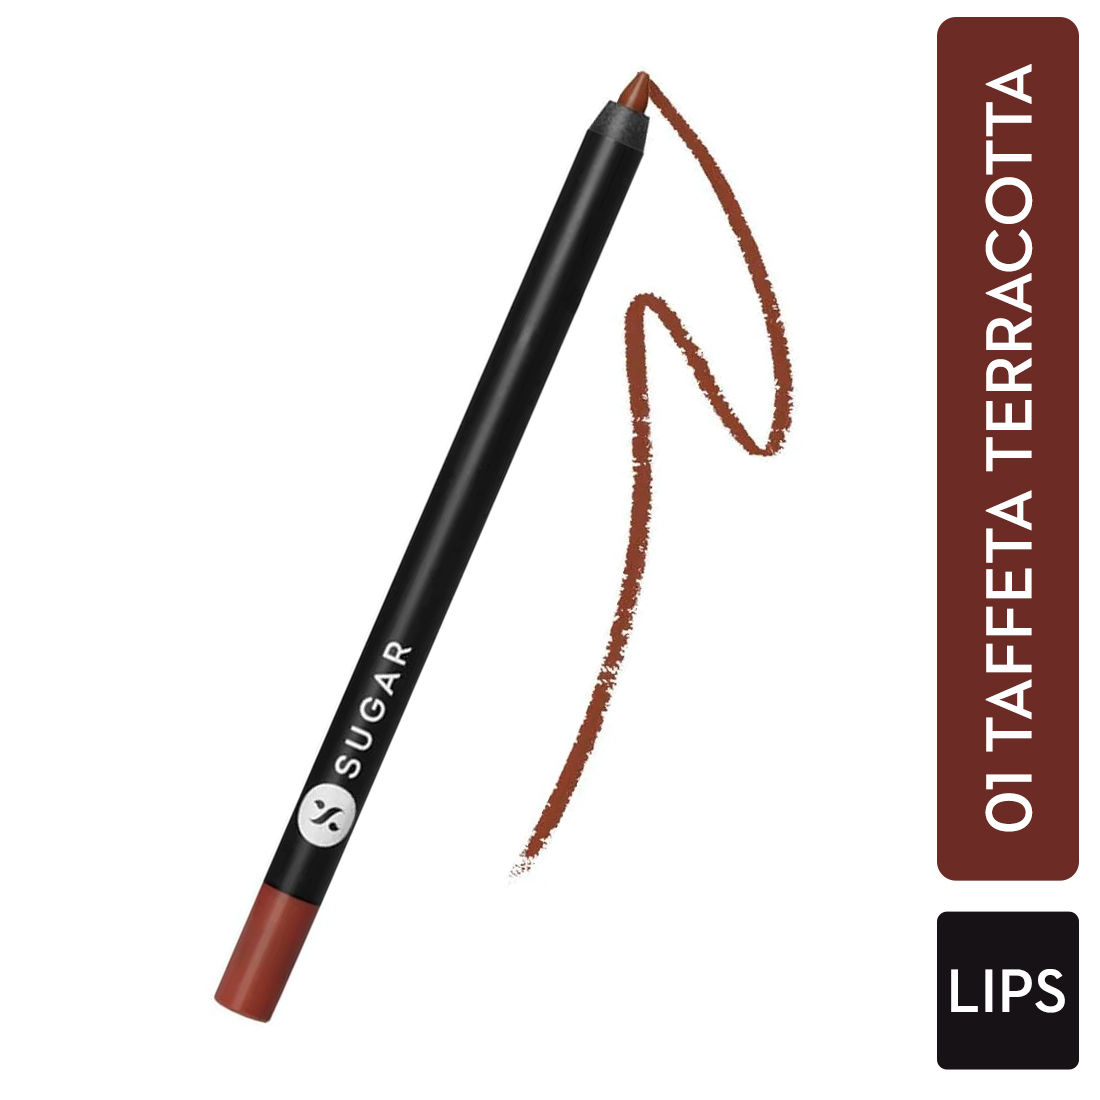 Buy SUGAR Cosmetics - Lipping On The Edge - Lip Liner - 01 Taffeta Terracotta (Terracotta Brown) - 1.2 gms - Smear-proof, Water Resistant Lip Liner - Lasts Up to 10 hrs - Purplle